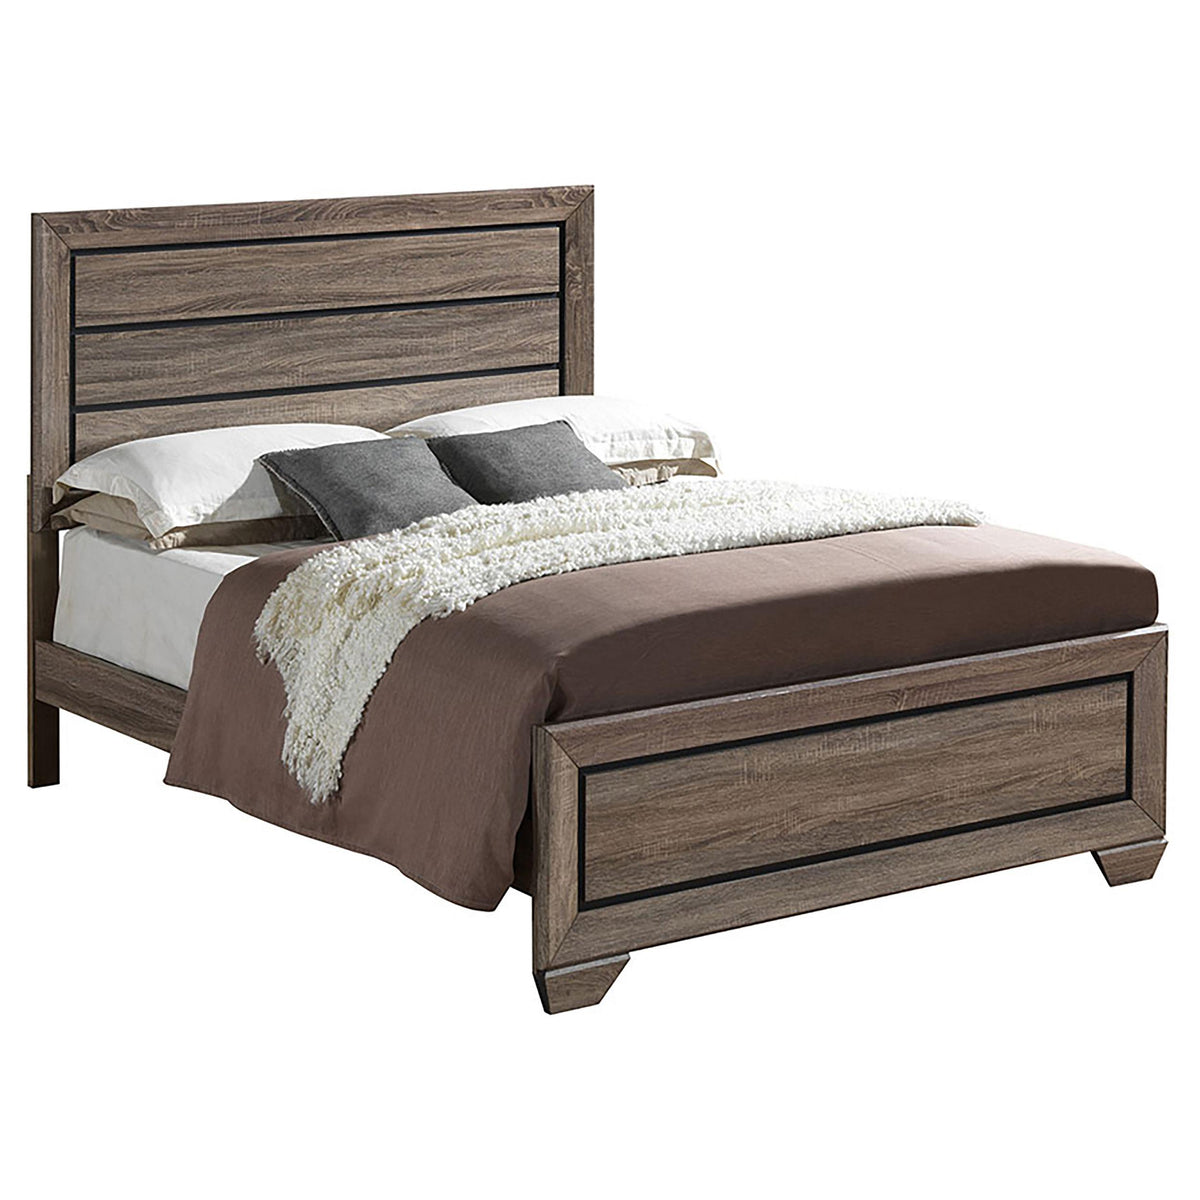 Kauffman Eastern King Panel Bed Washed Taupe Kauffman Eastern King Panel Bed Washed Taupe Half Price Furniture